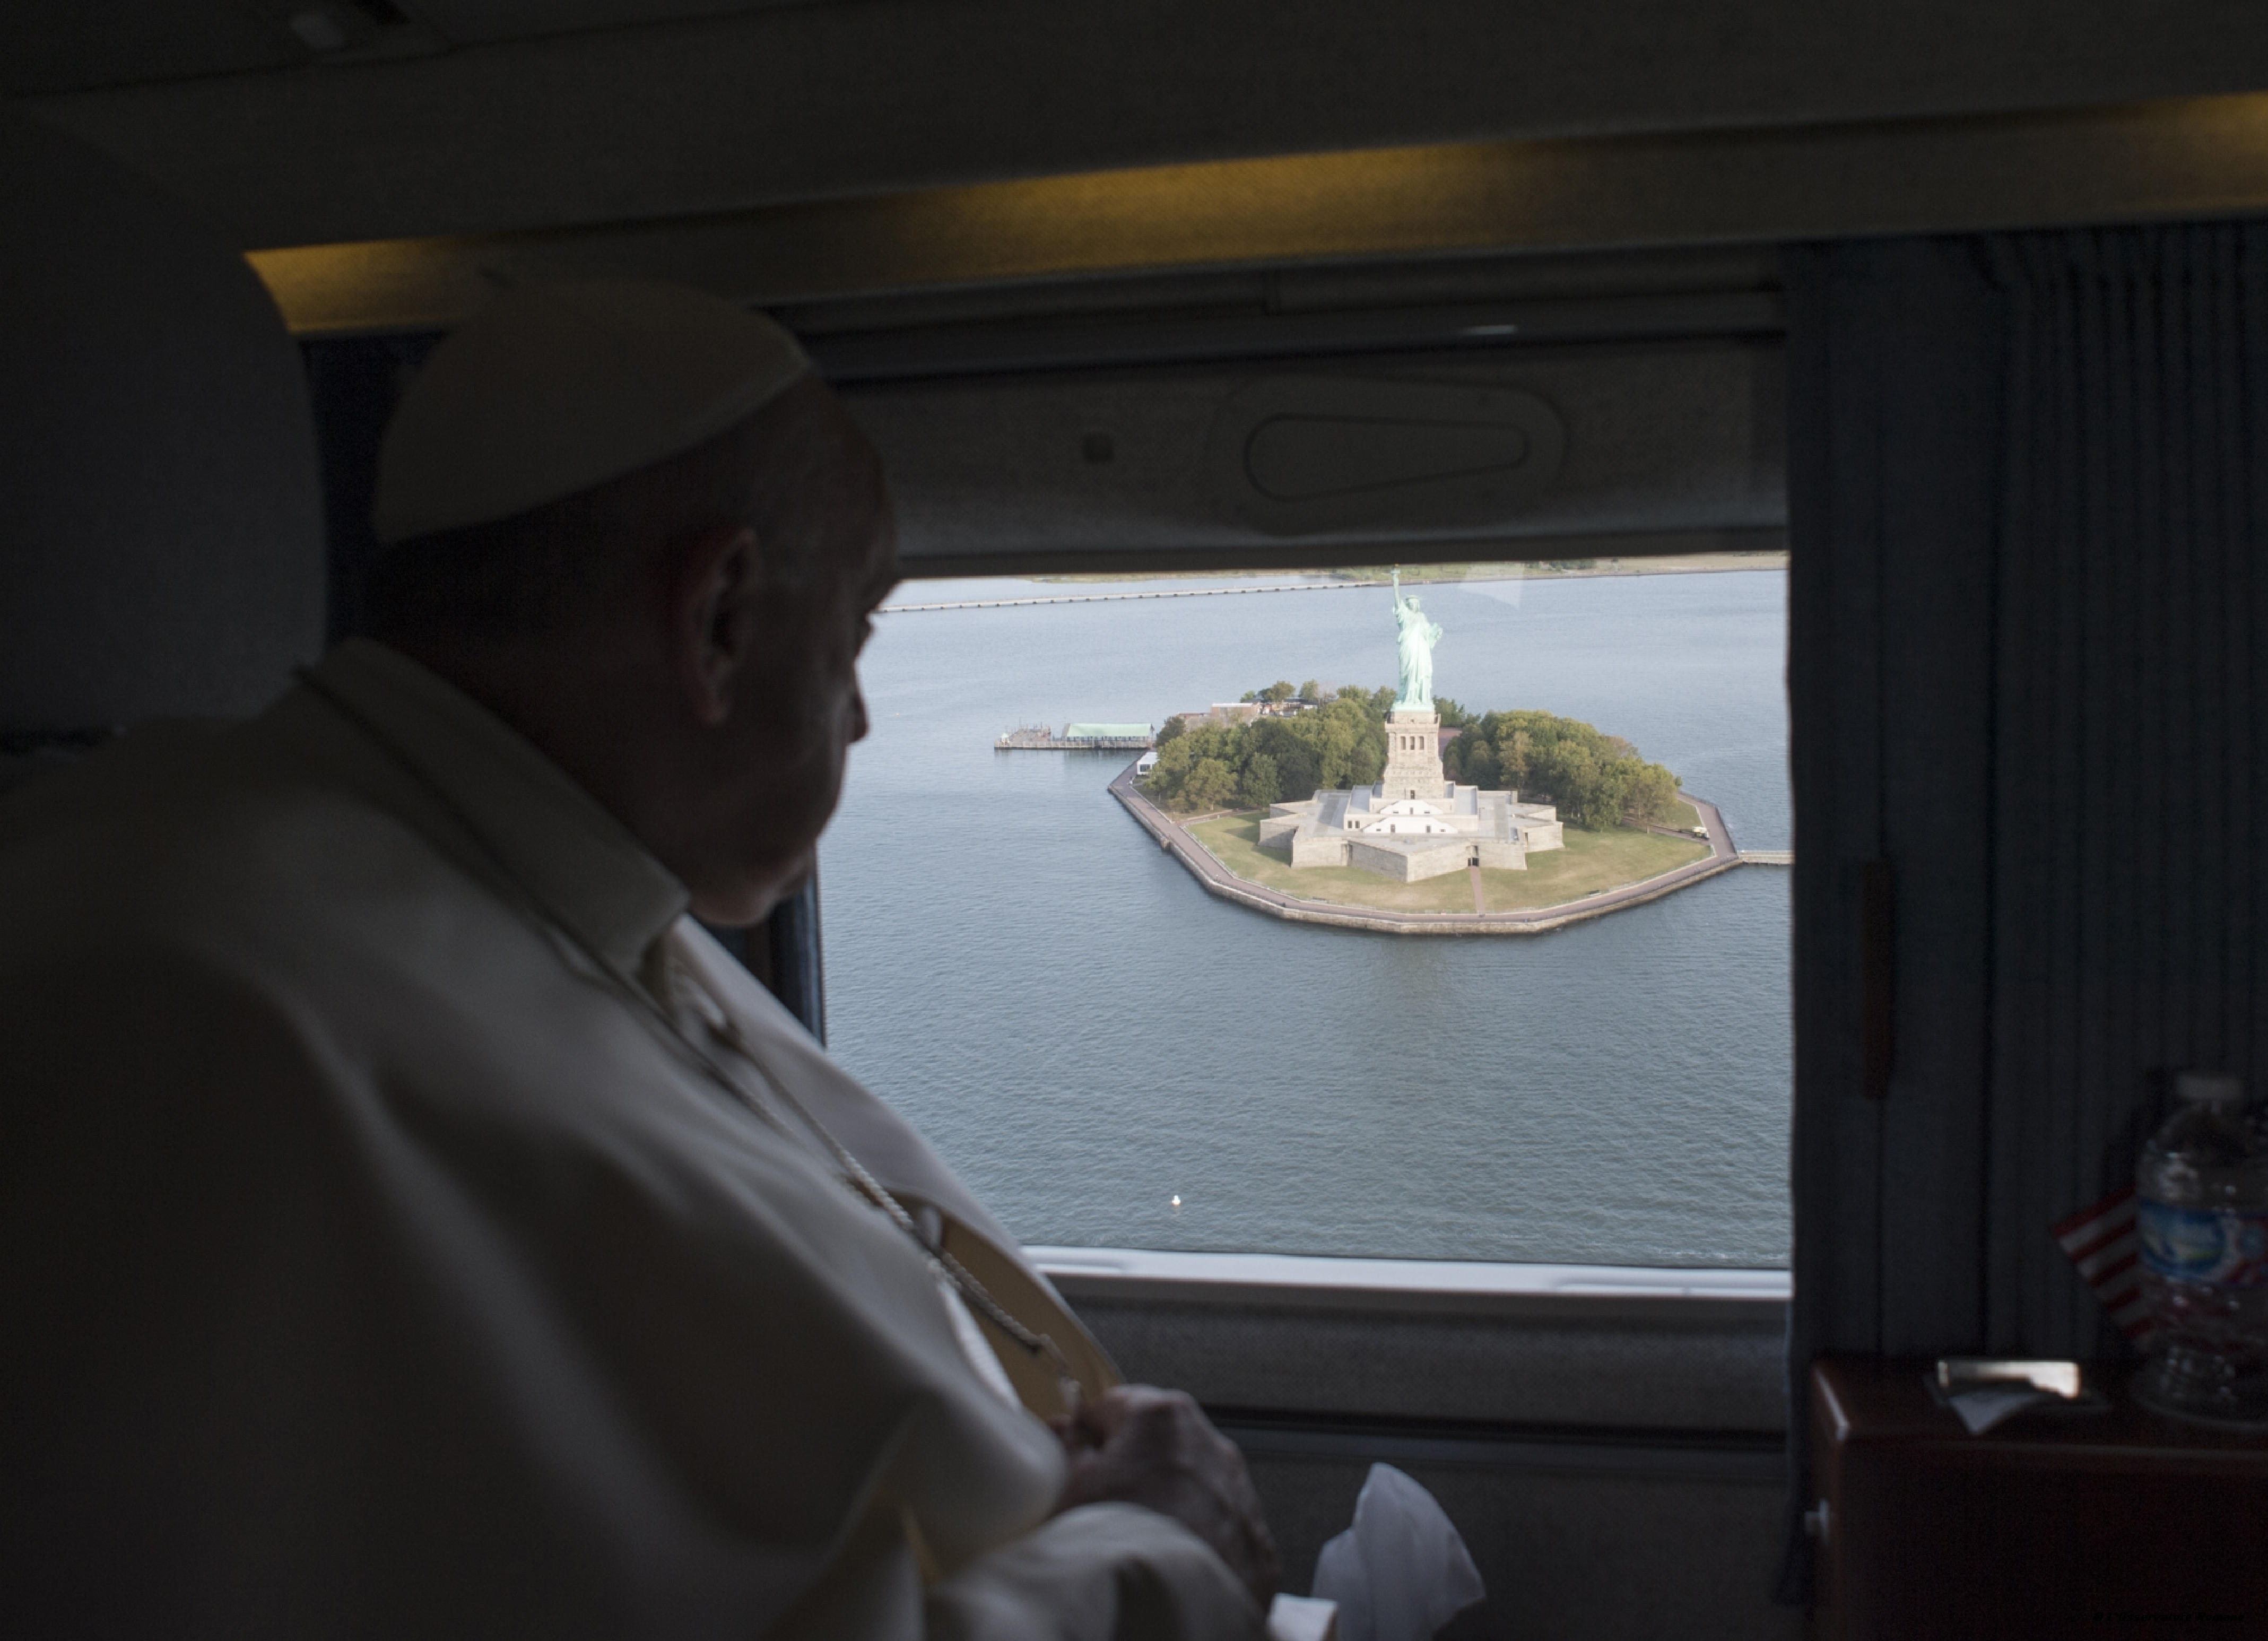 Pope Francis looks at the Statue of Liberty from the window of the helicopter on his way to the John F. Kennedy International Airport